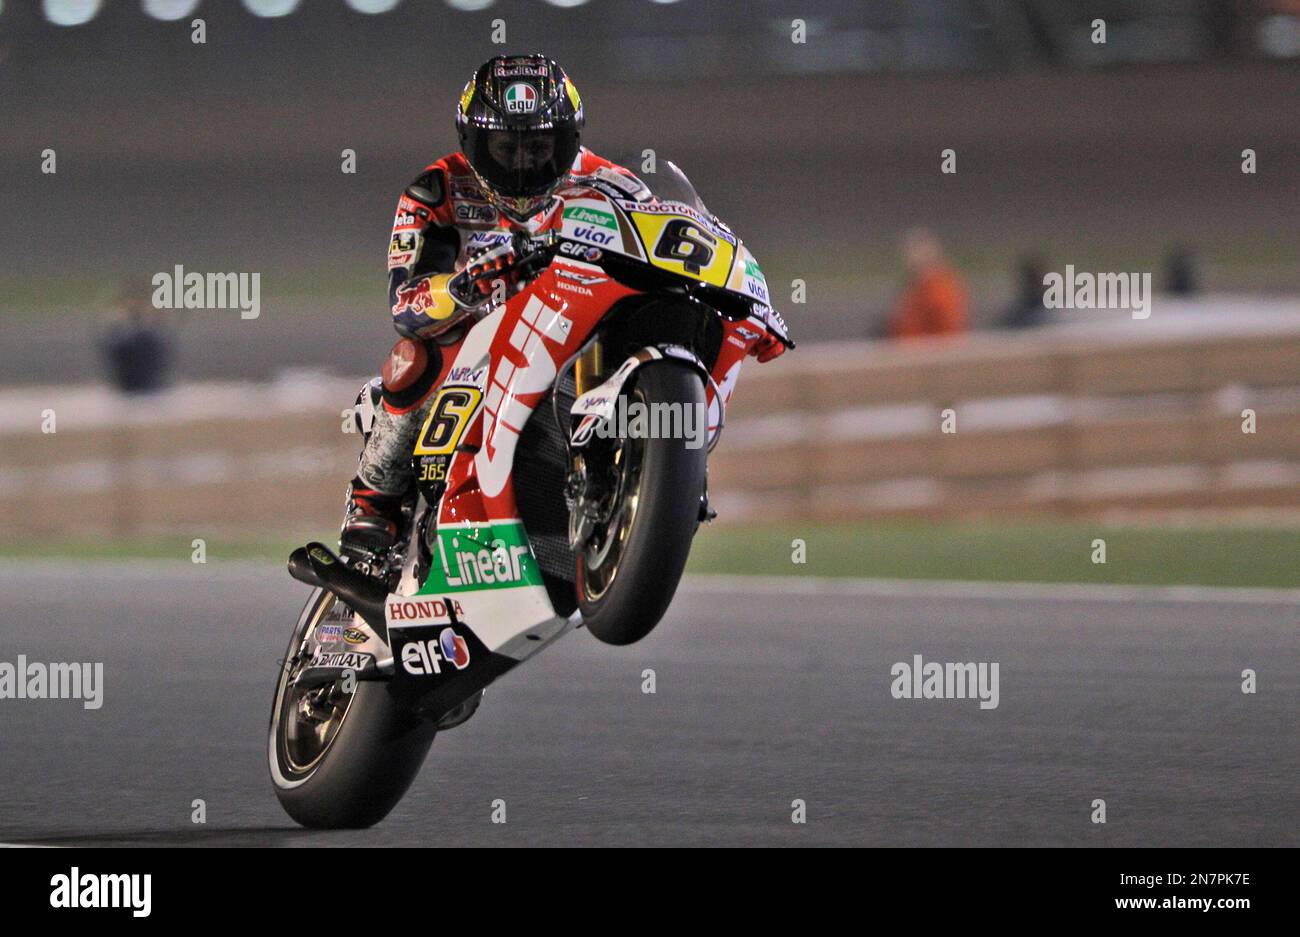 German MotoGP rider Stefan Bradl of the LCR Honda MotoGP team pulls a wheelie after the qualifying session a day ahead of Sundays Qatar Moto GP, at the Losail International Circuit, Saturday,